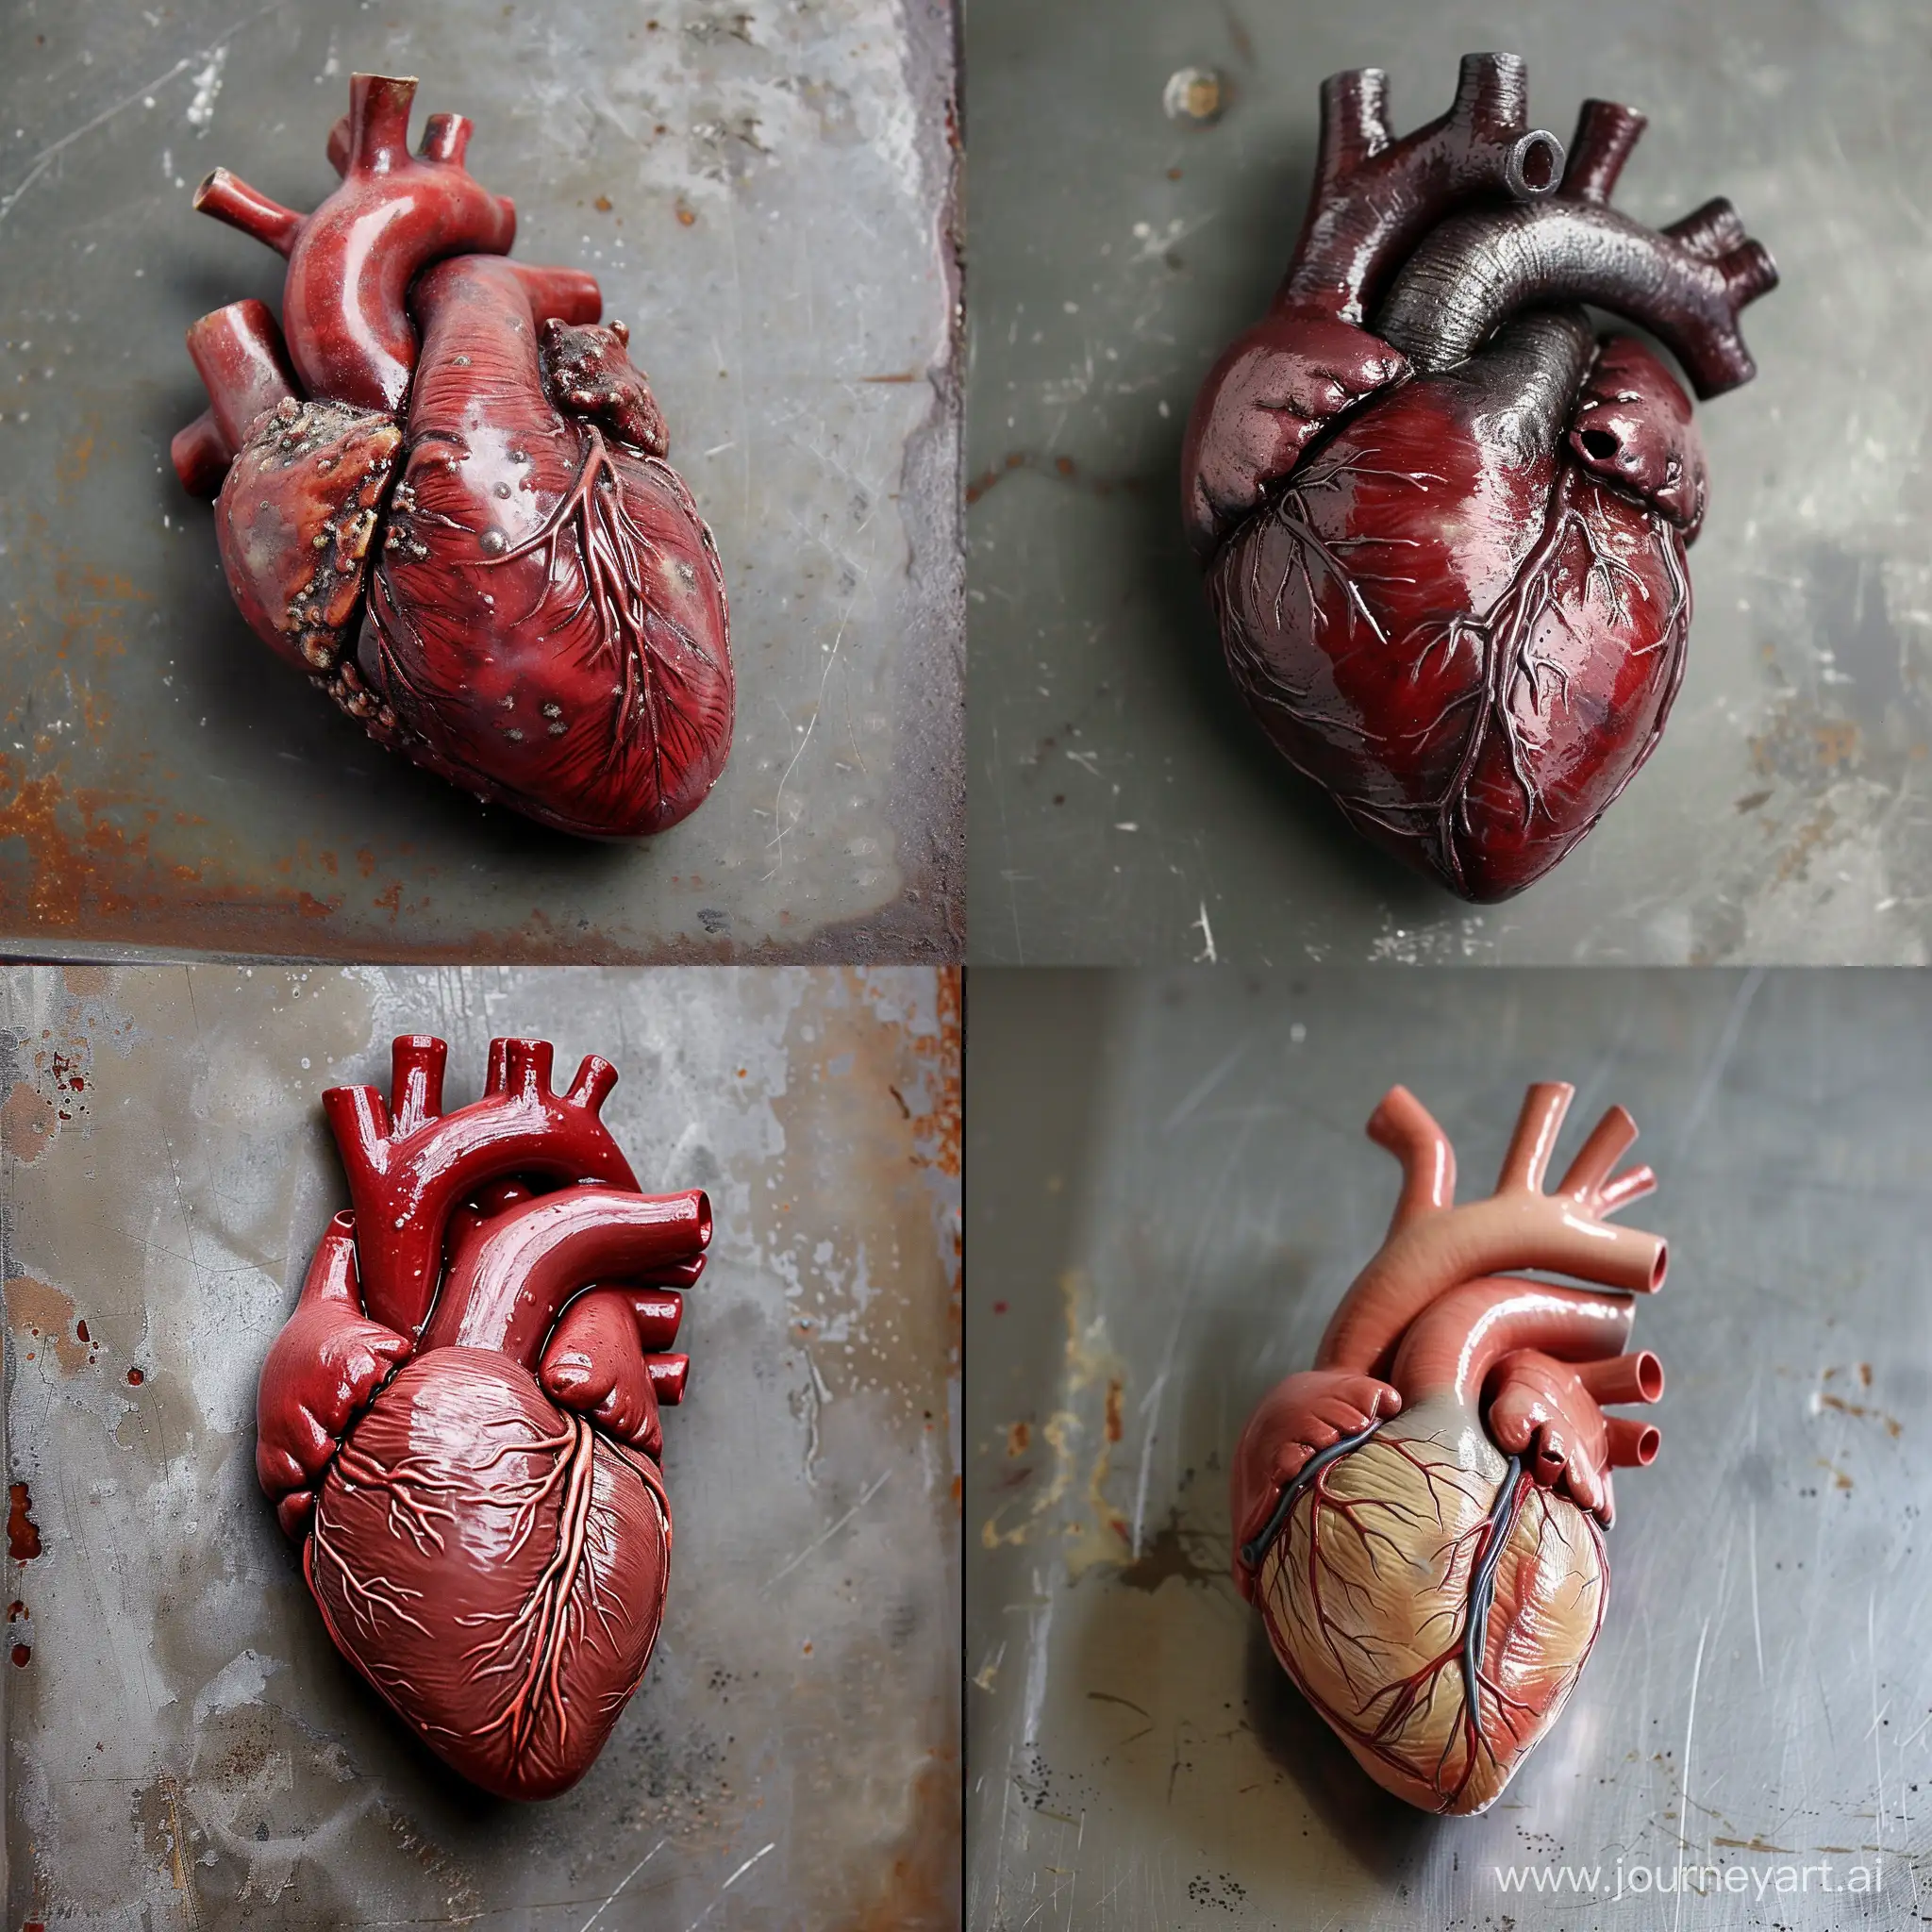 Steel-Surface-Display-of-Human-Heart-Vibrant-and-Detailed-Anatomy-Art